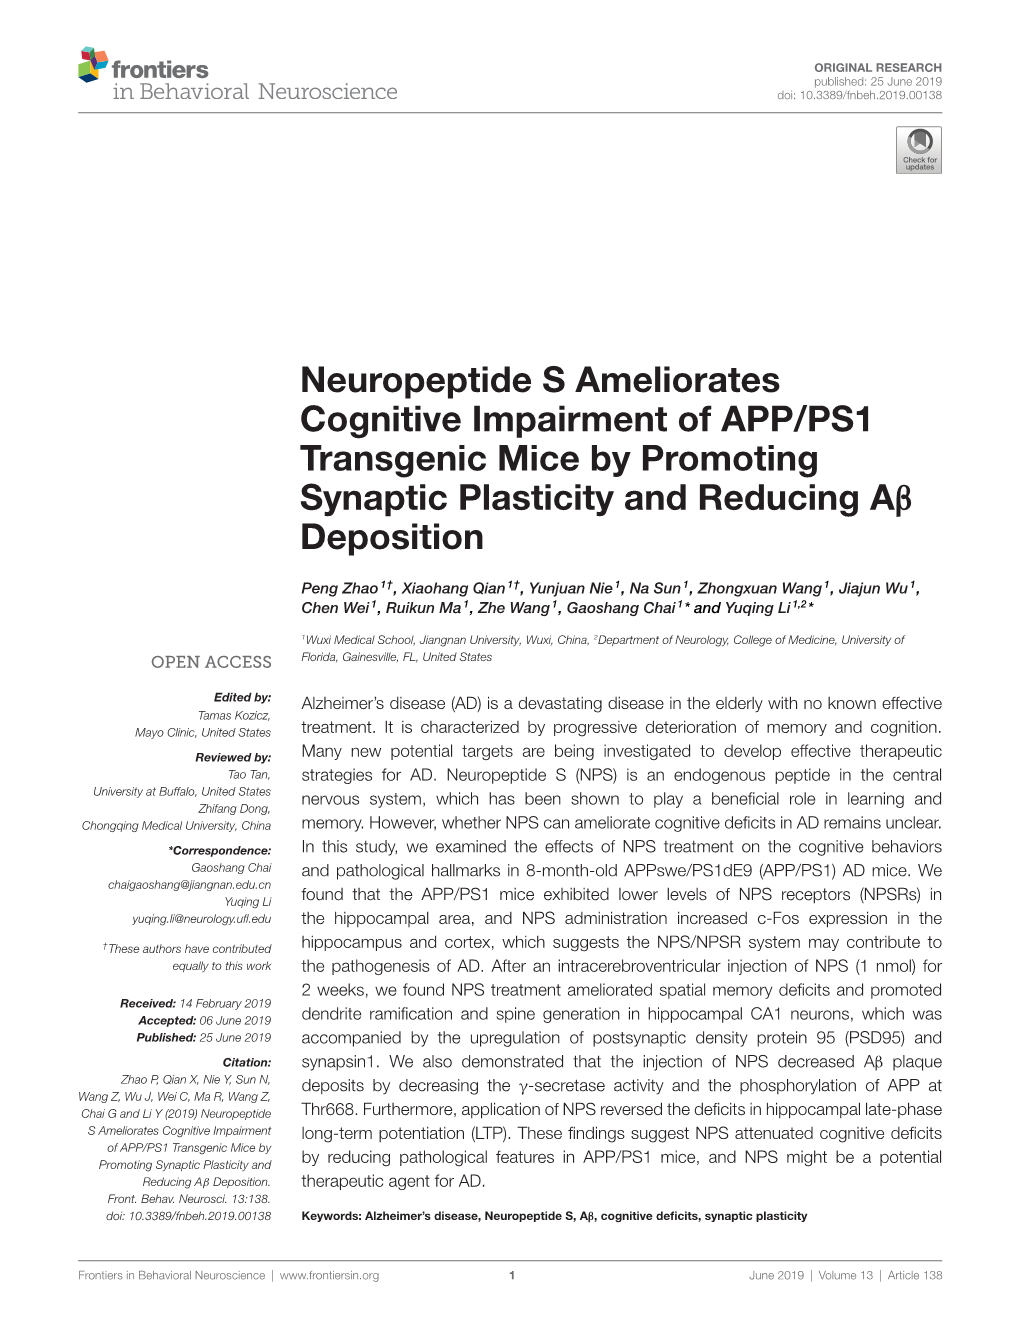 Neuropeptide S Ameliorates Cognitive Impairment of APP/PS1 Transgenic Mice by Promoting Synaptic Plasticity and Reducing Aβ Deposition